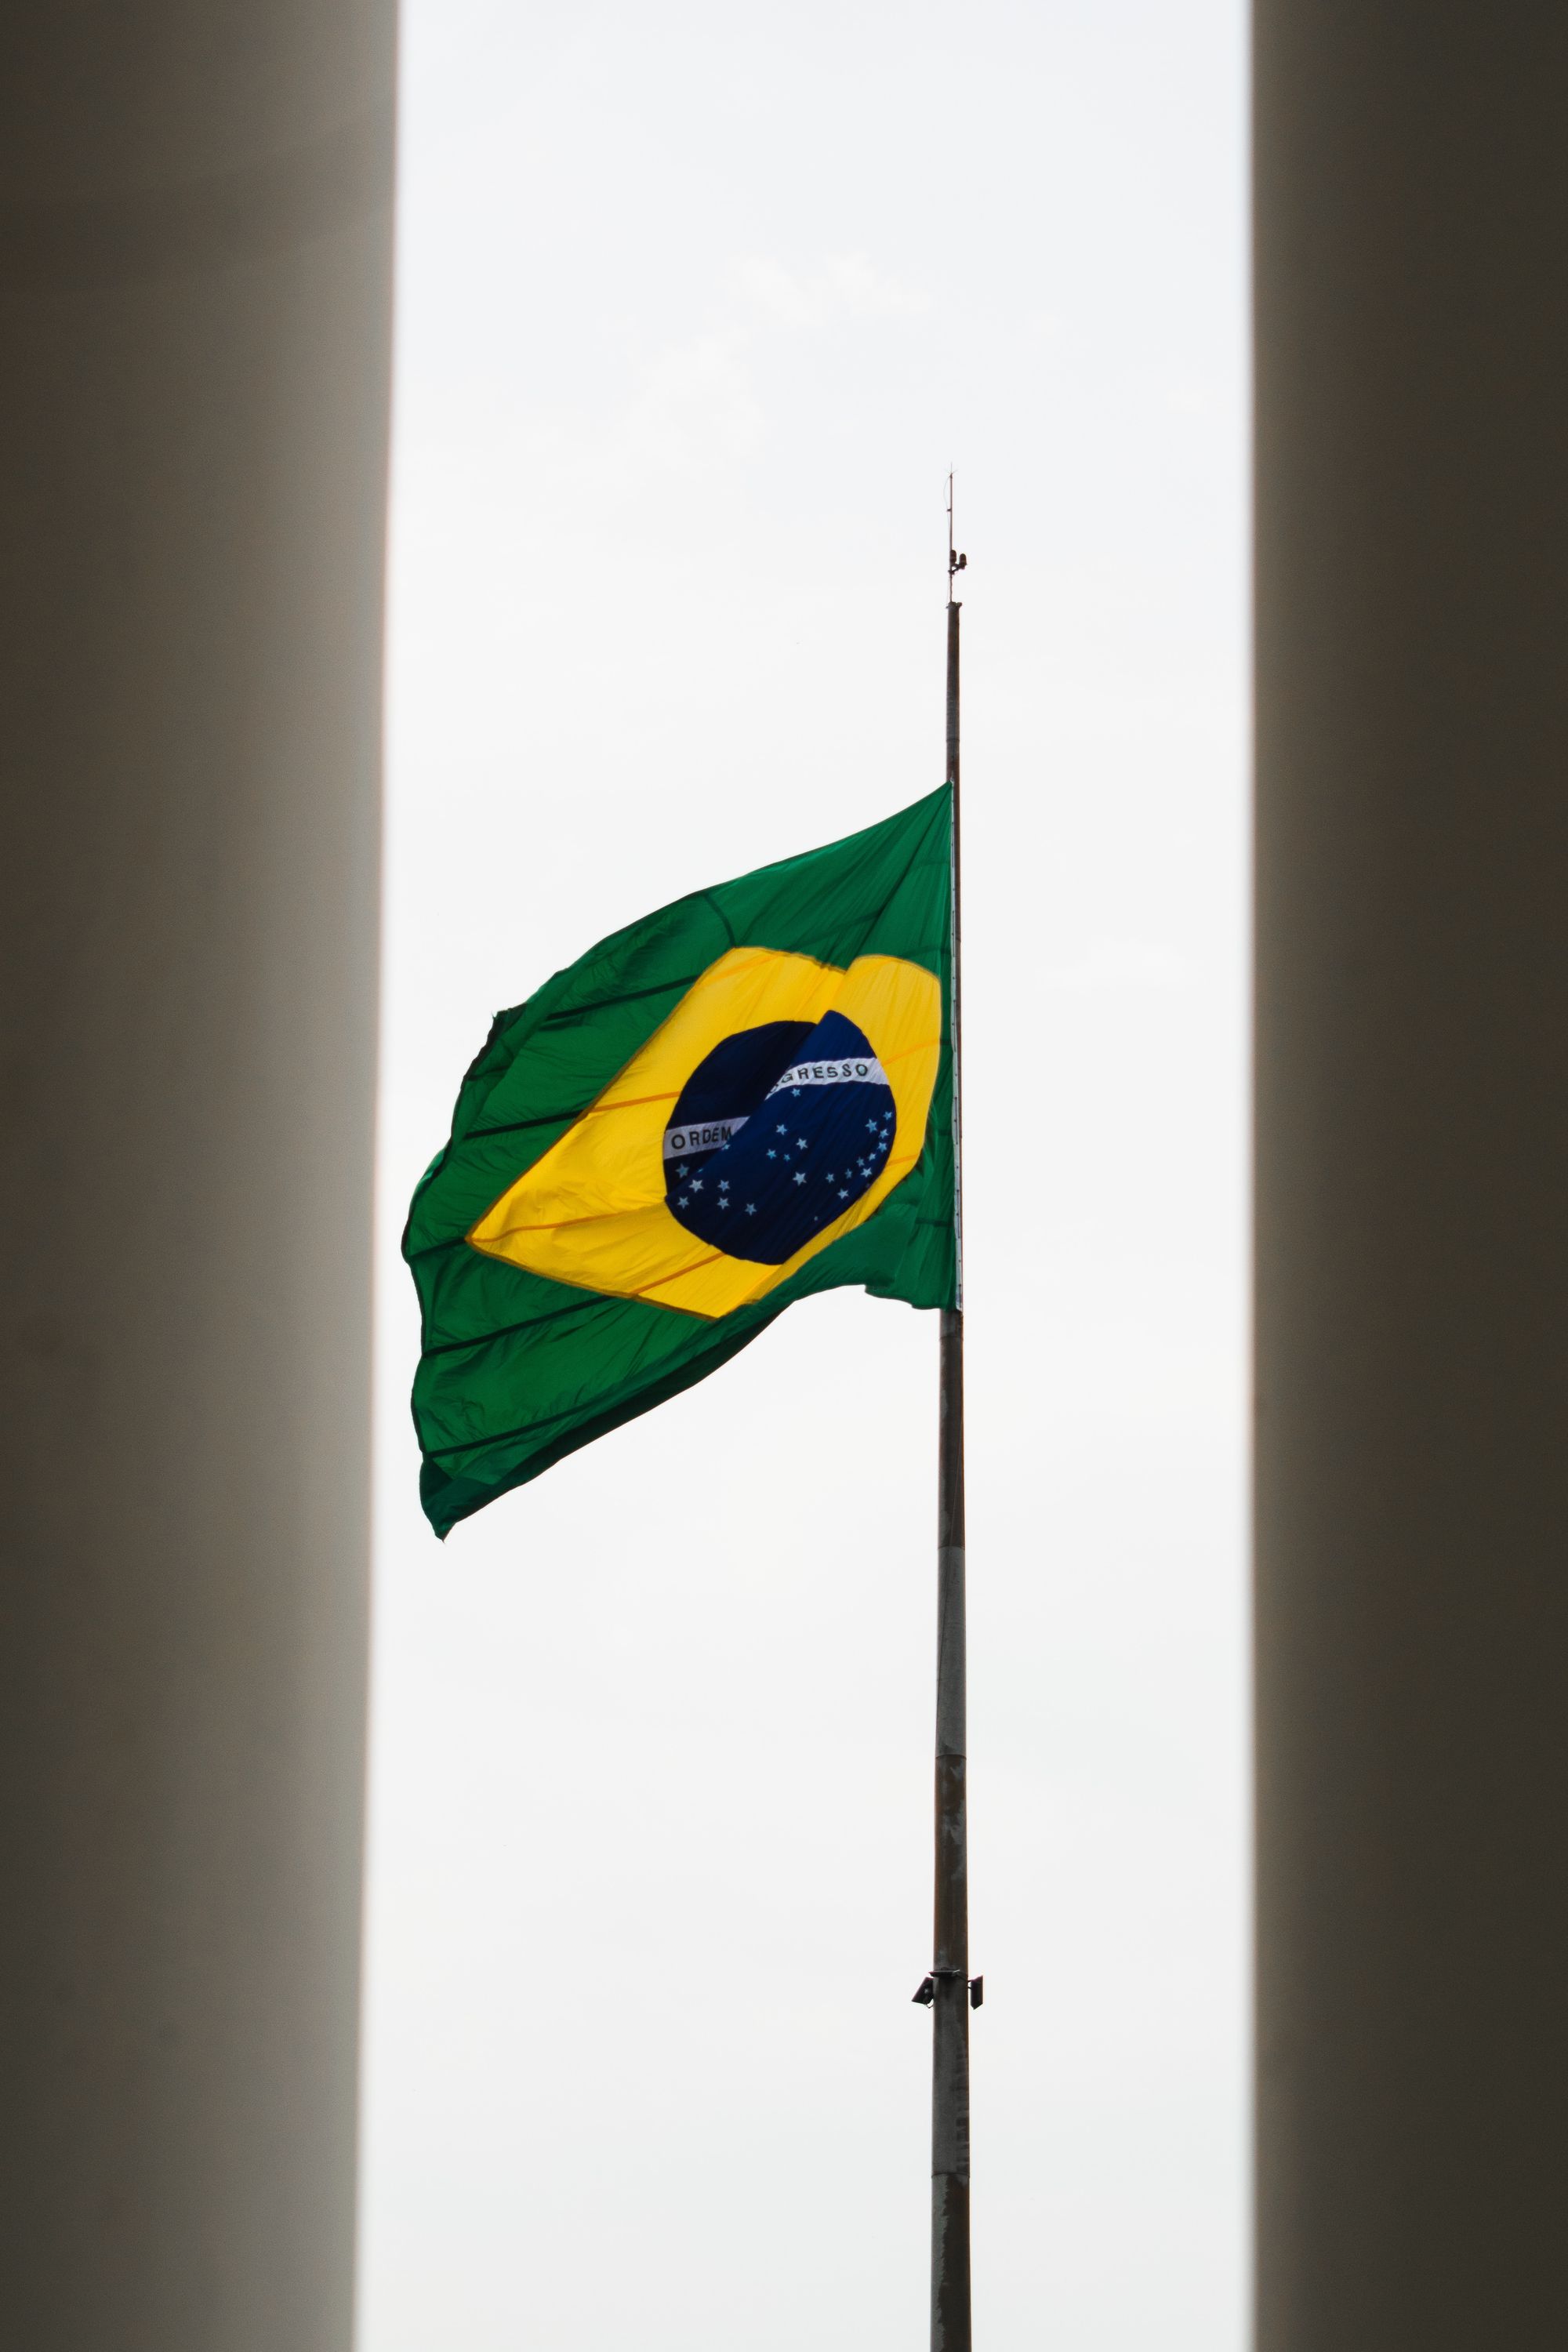 The Parliamentary Response to Covid-19 in Brazil: Overriding Vetoes as a Form of Legislative Resistance to Government Denialism